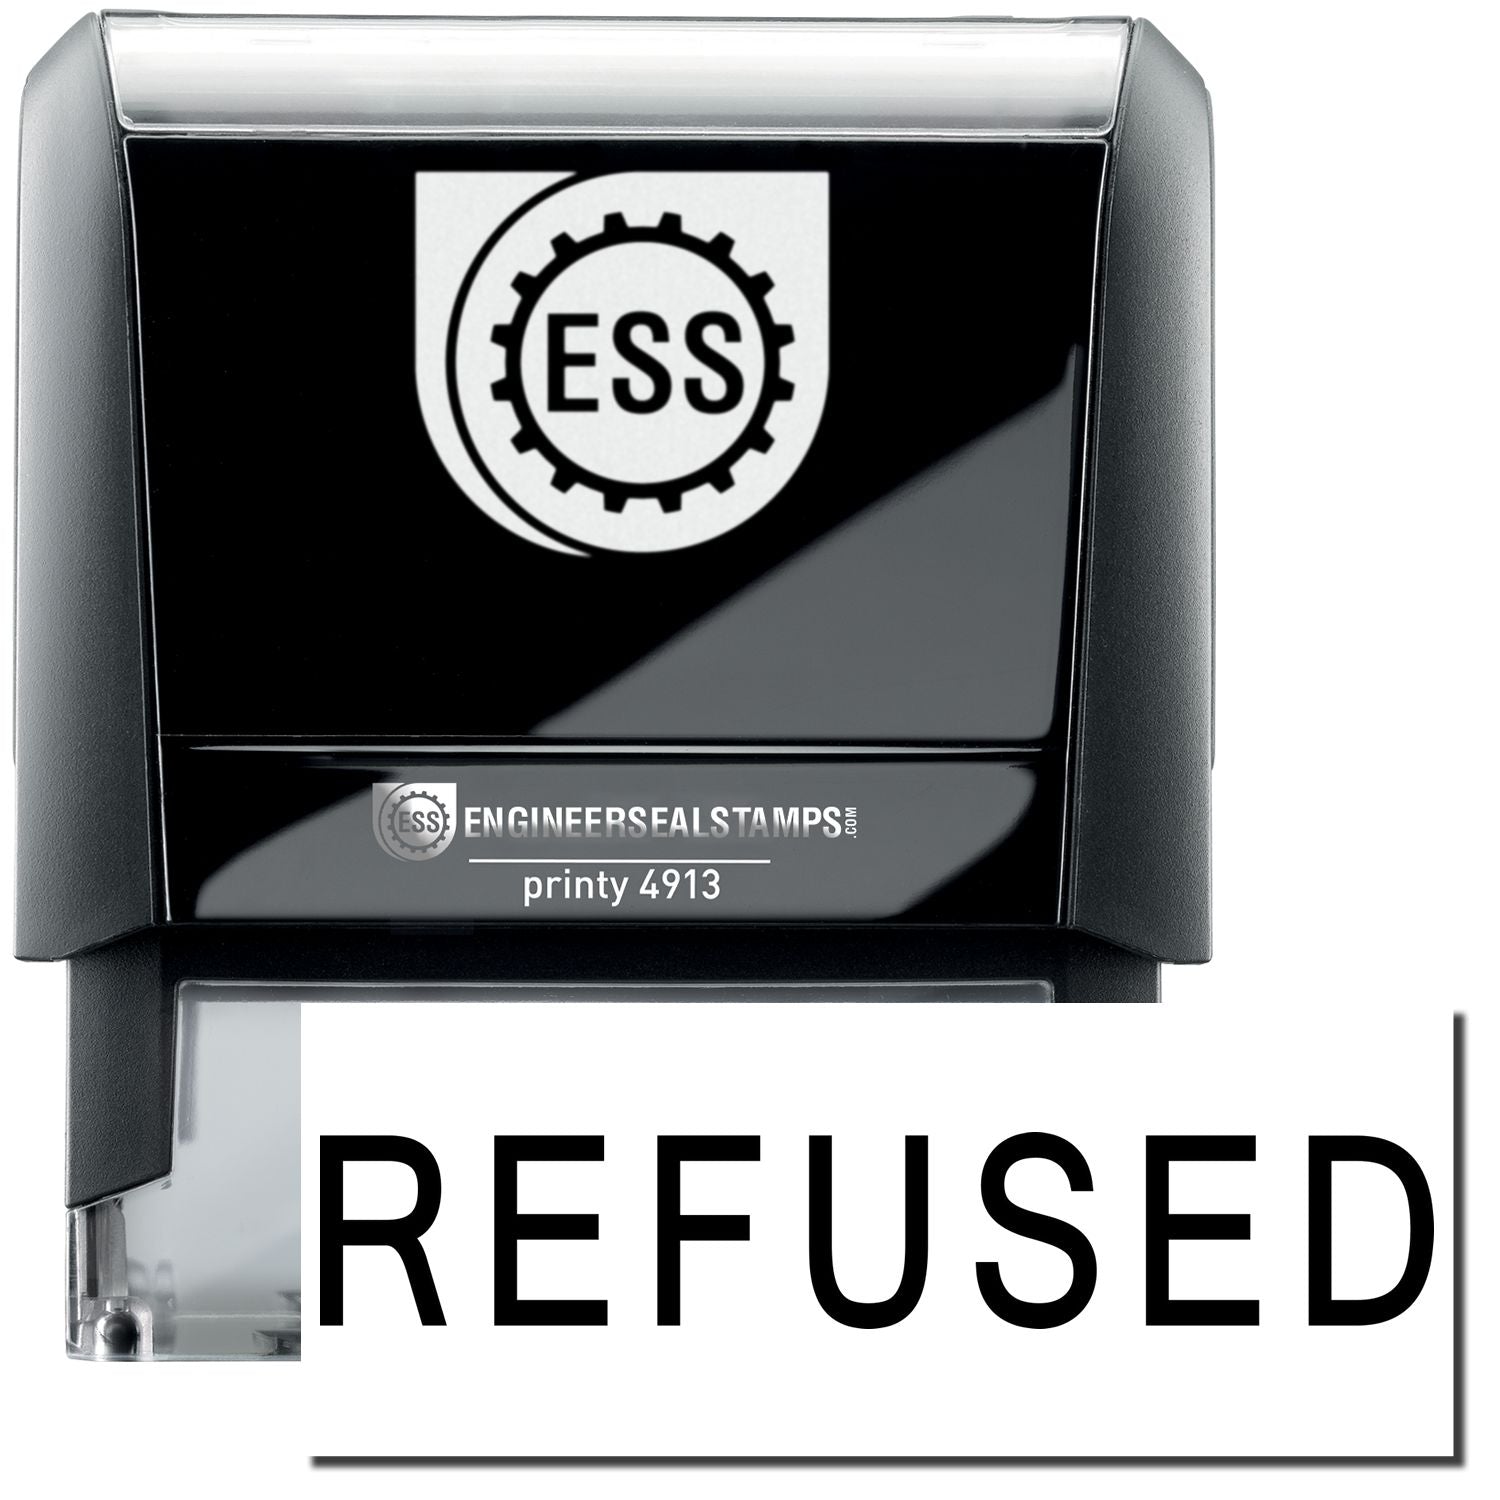 A self-inking stamp with a stamped image showing how the text "REFUSED" in a large font is displayed by it after stamping.